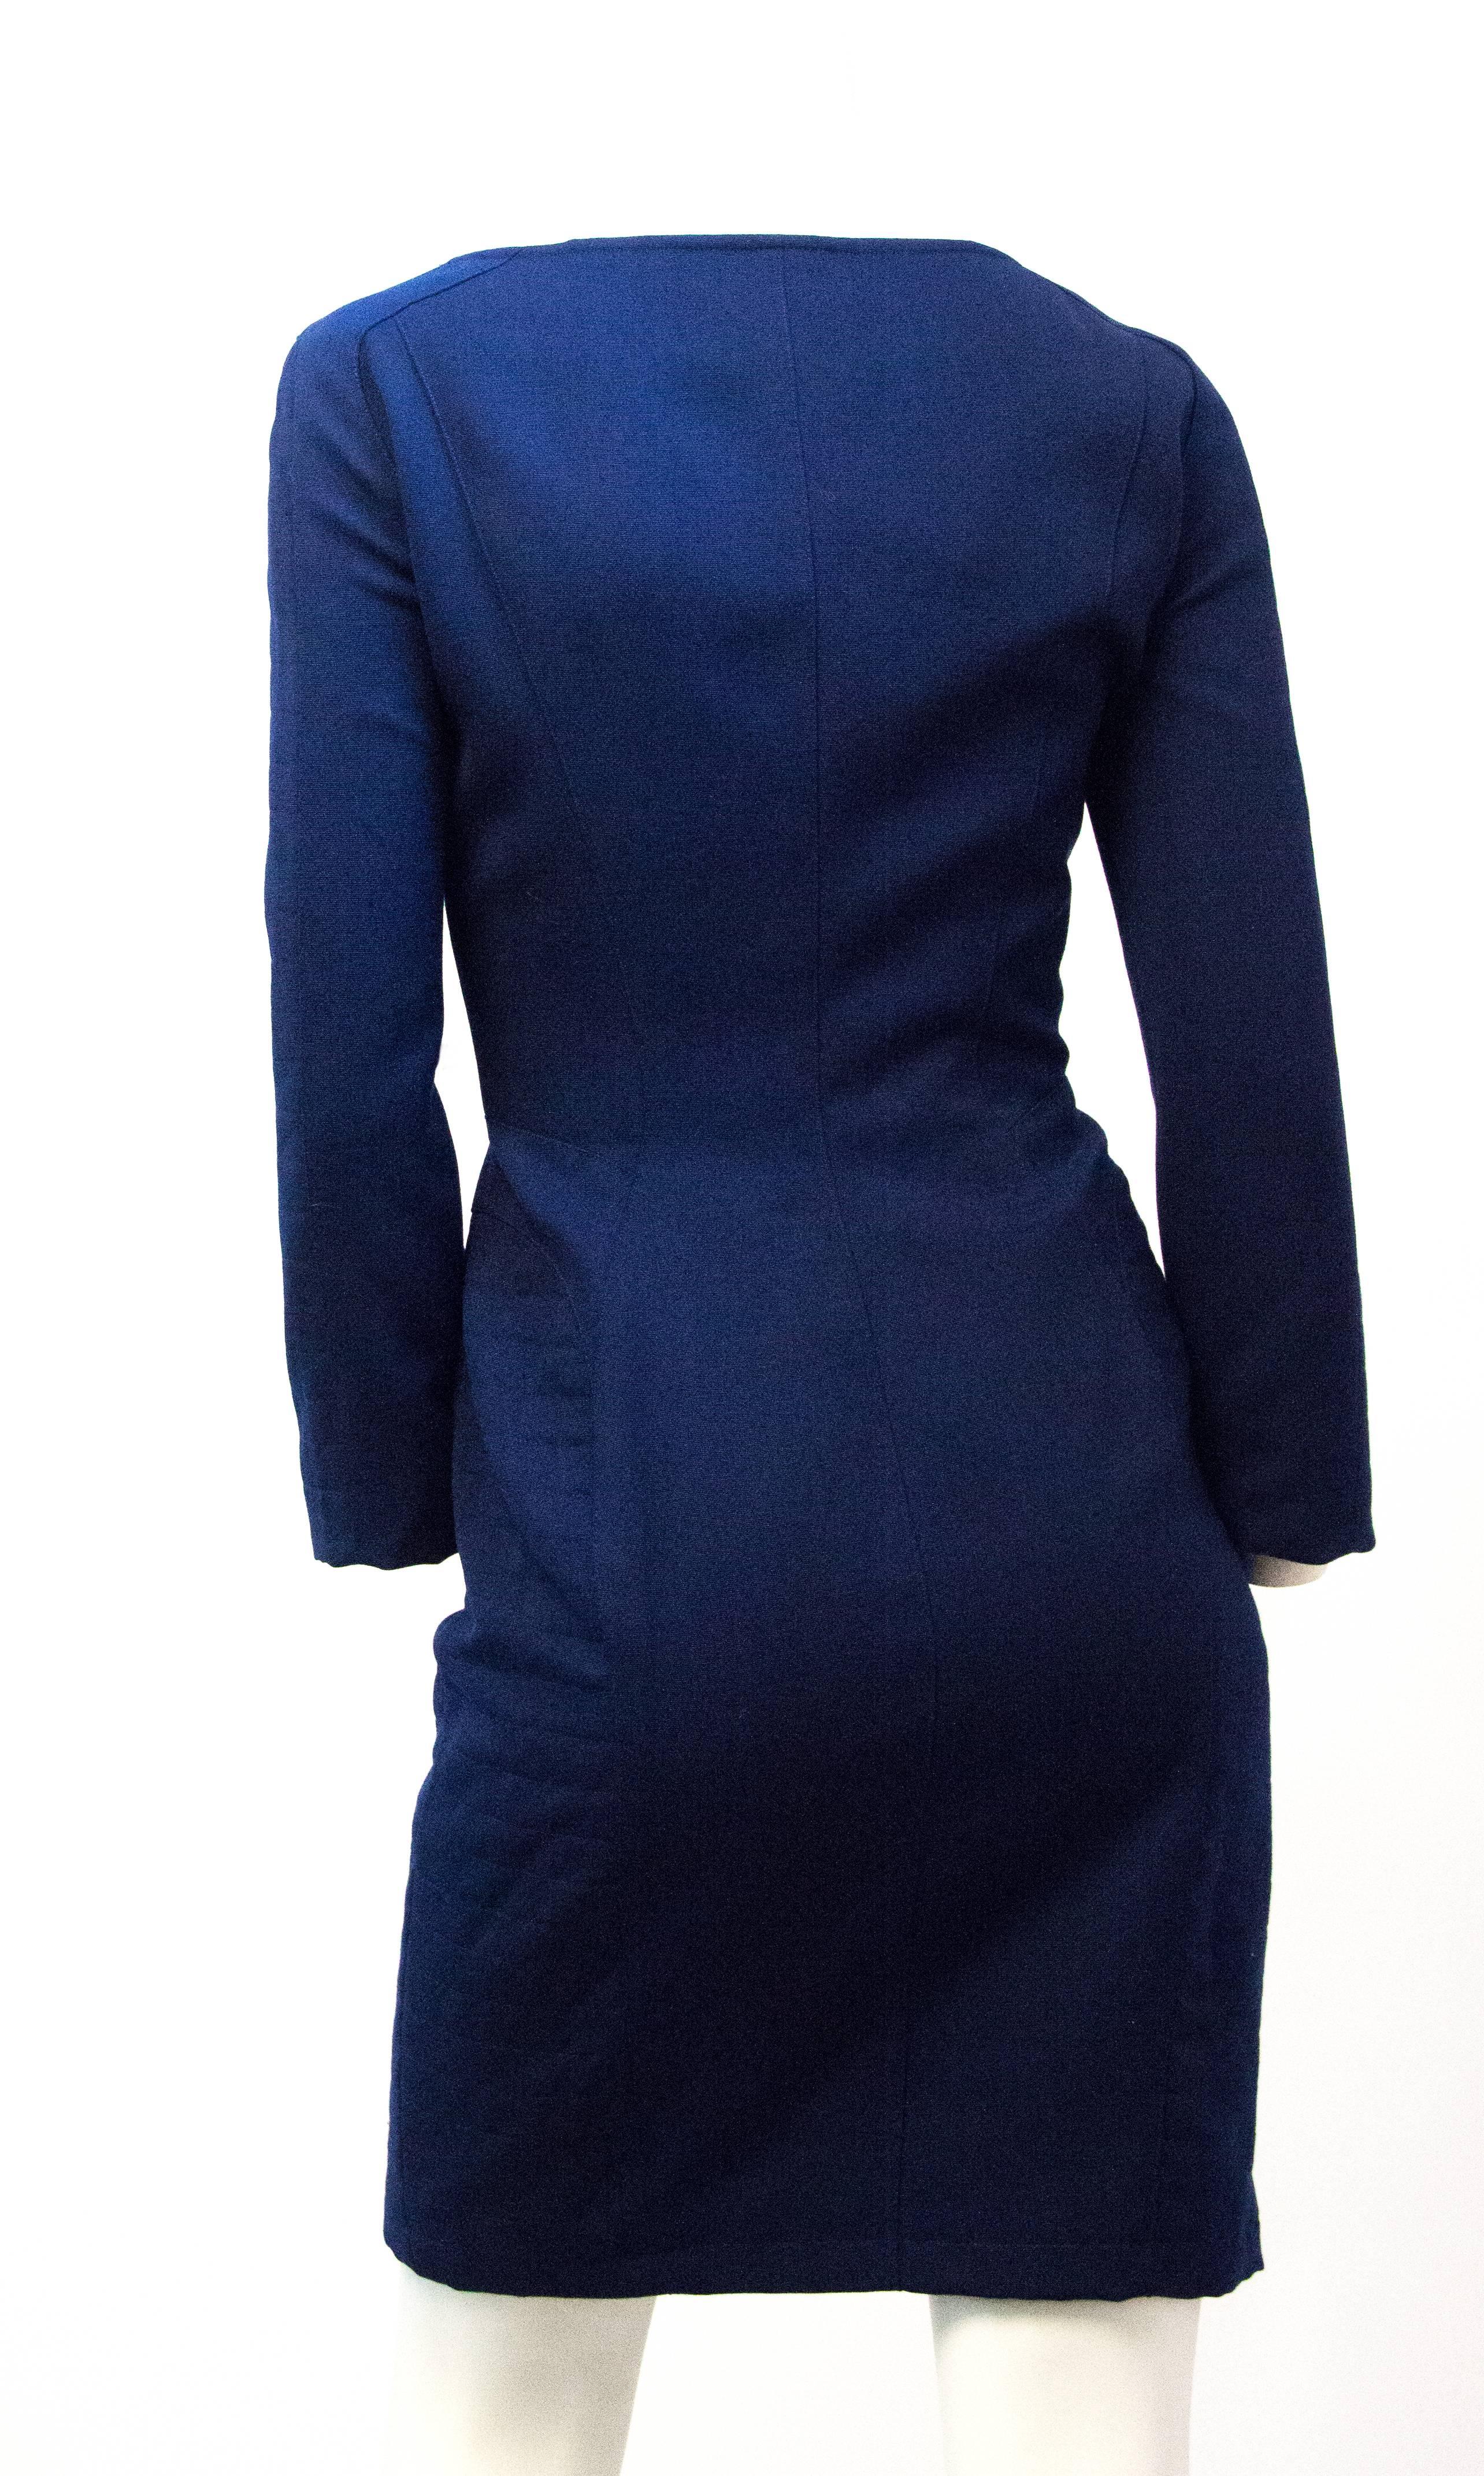 90s Mugler cobalt fitted coat dress. Quilted side and sleeve panels. Zippers up the front. Fully lined. 